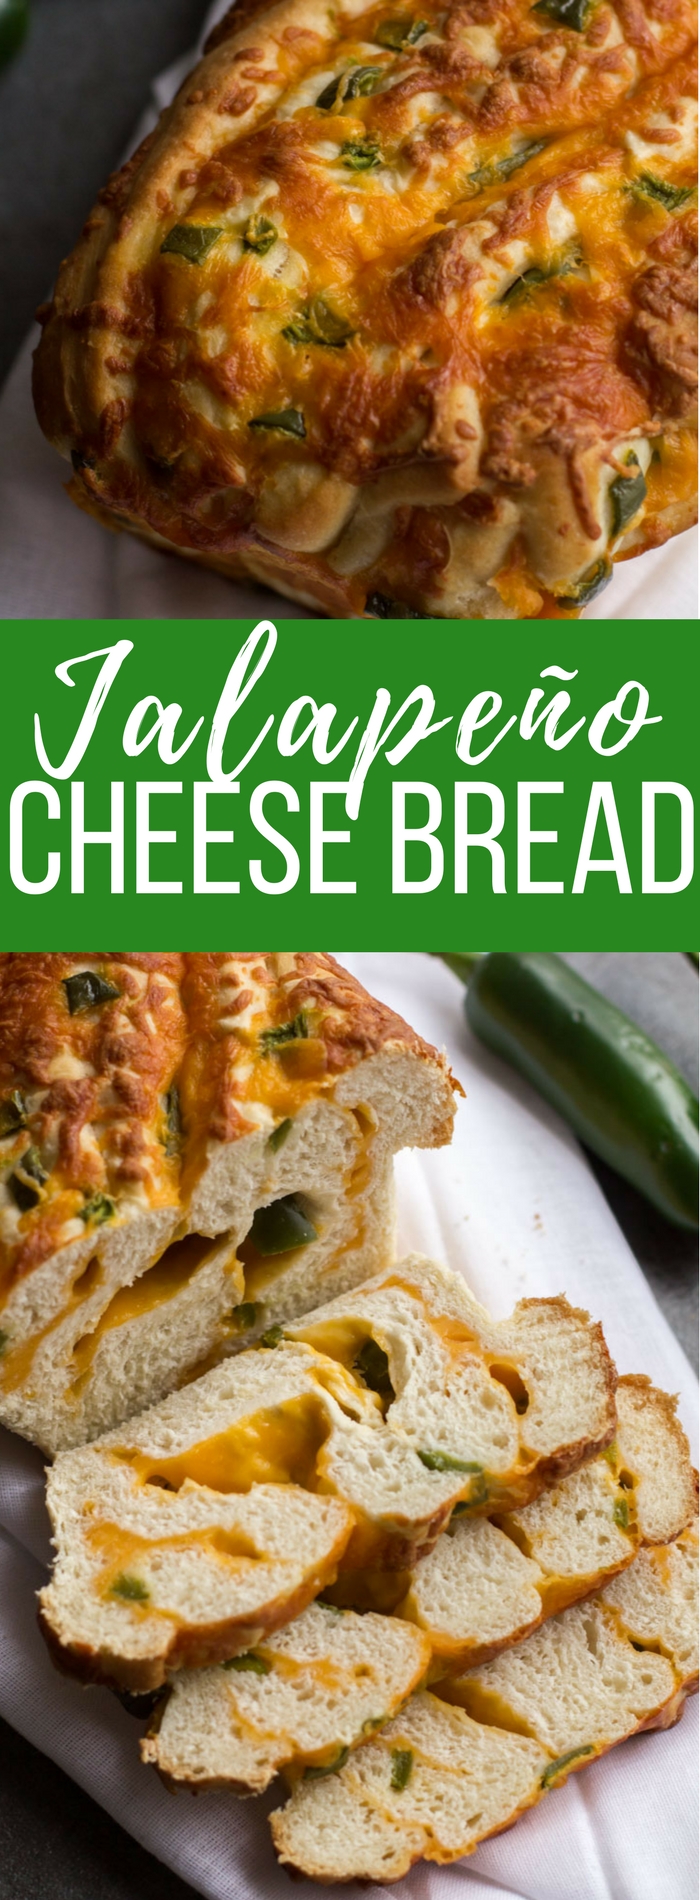 Jalapeno Cheese Bread is the cheesy, spicy deliciousness you need with every meal. From sandwiches to garlic bread, this loaf goes with everything.